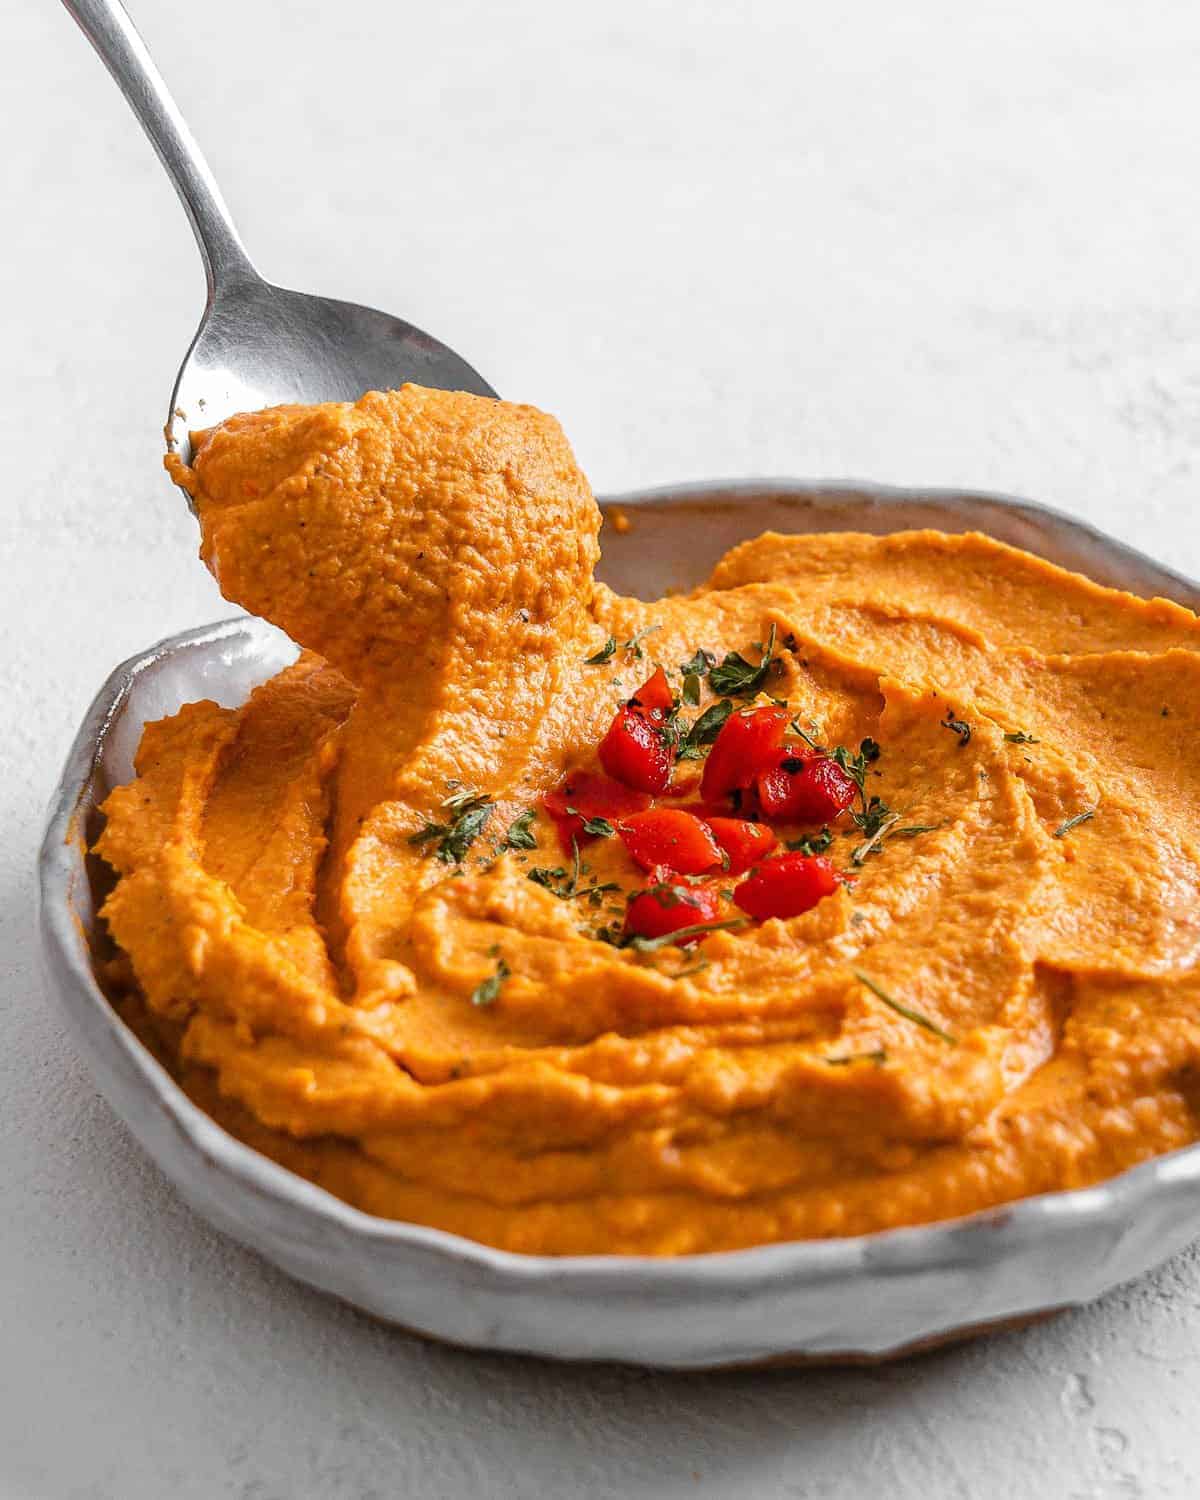 completed Smoky Roasted Red Pepper Hummus against a white background with a spoonful shown